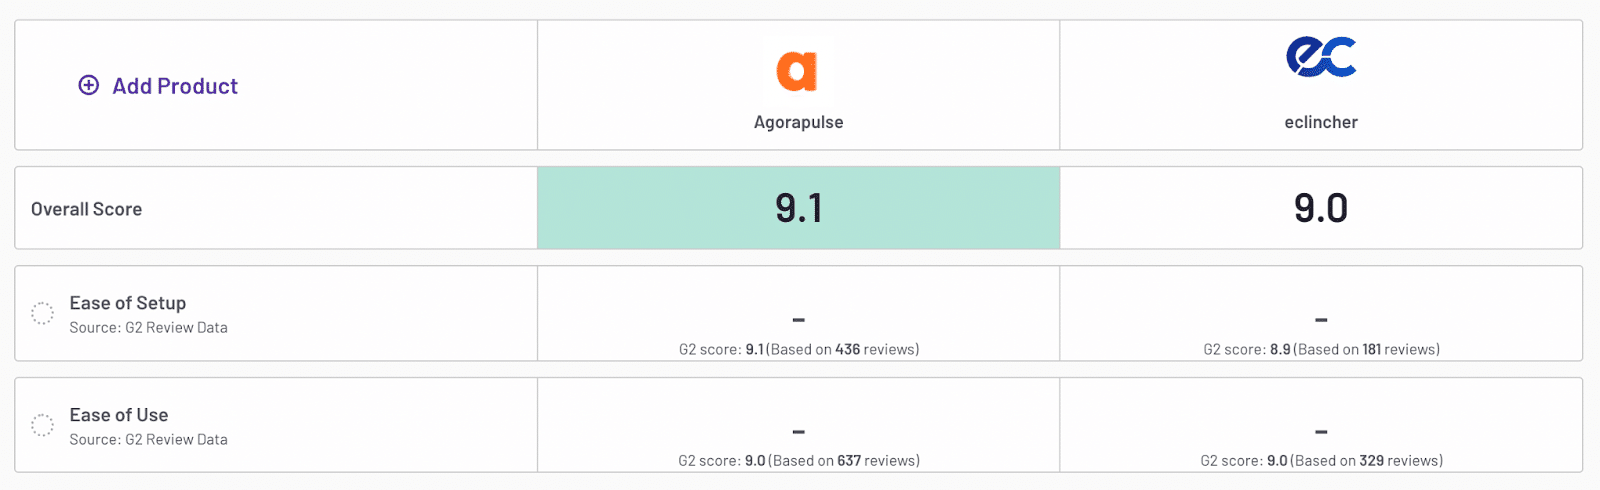 agorapulse vs eclincher ease of setup and ease of use score on g2